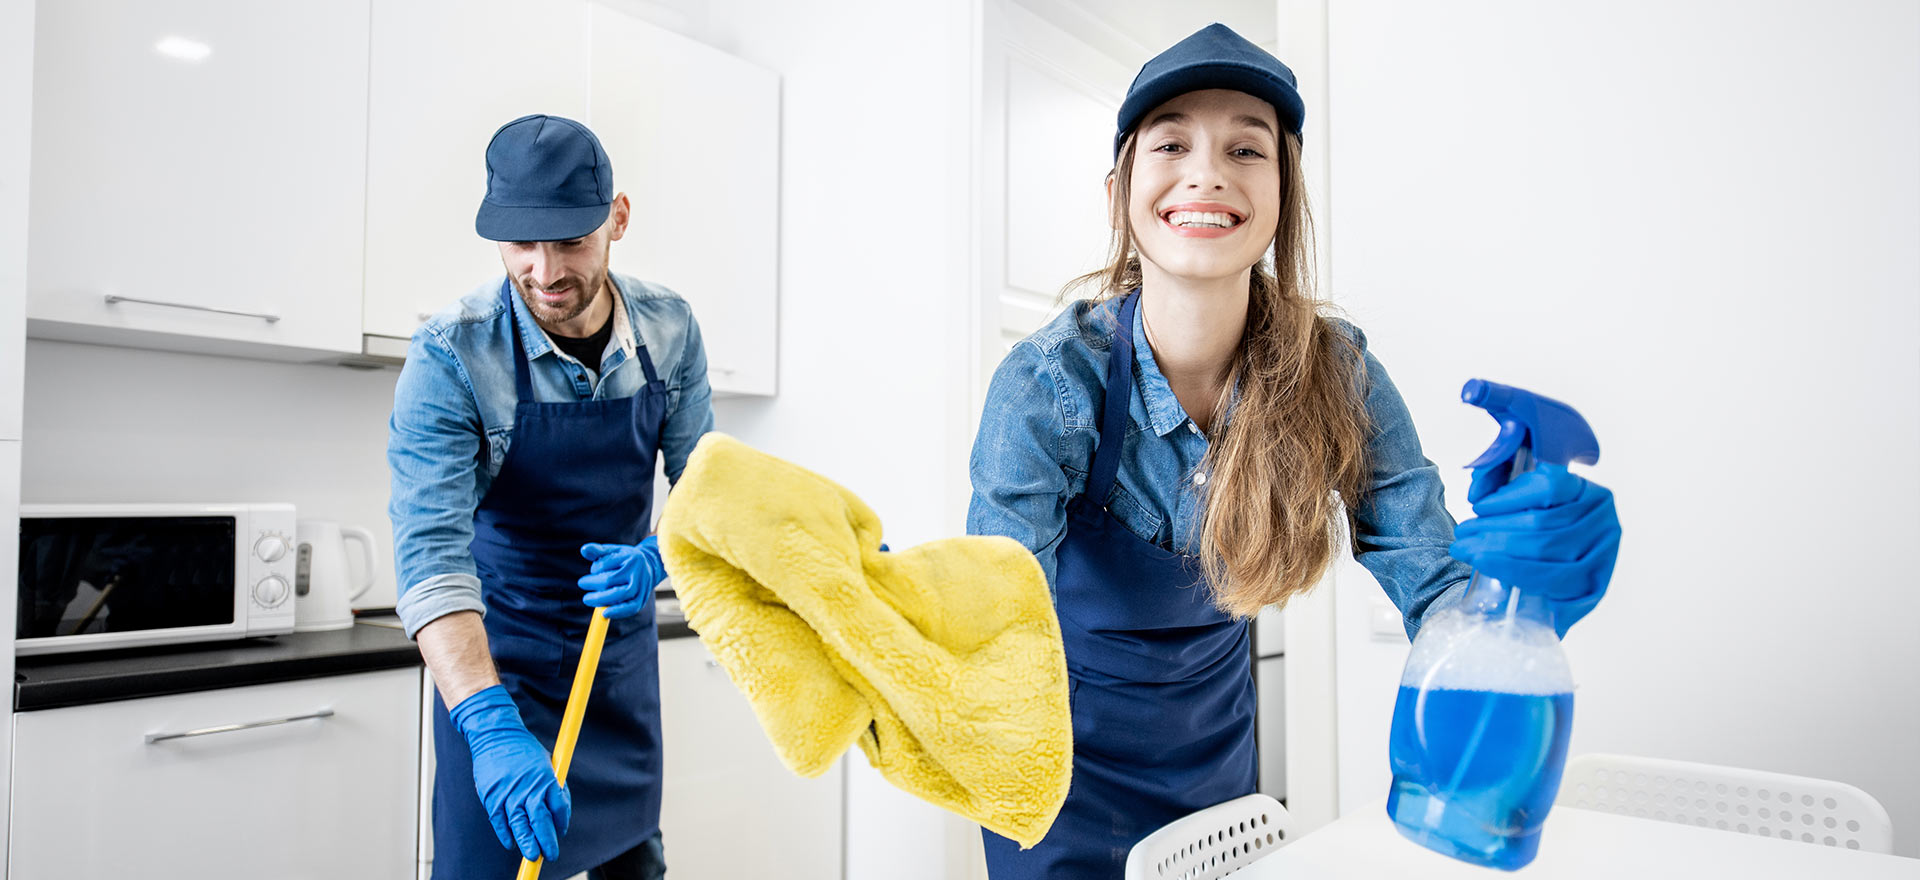 Cleaning Malta for Home & Office | Clentec Cleaning